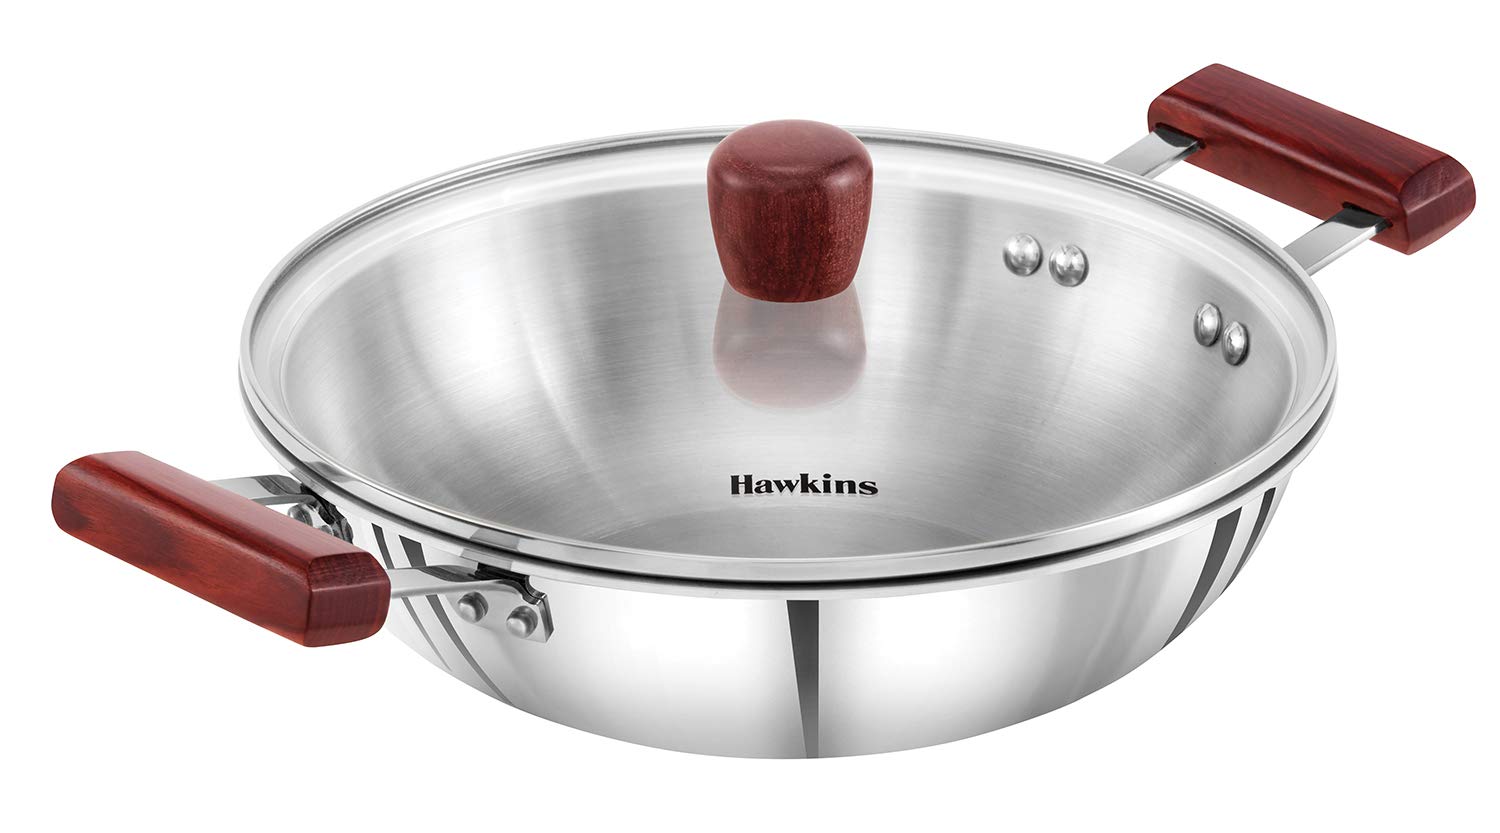 Hawkins Tri-Ply Stainless Steel Induction Compatible Deep-Fry Pan, Capacity 2.5 Litre, Diameter 26 cm, Thickness 3 mm